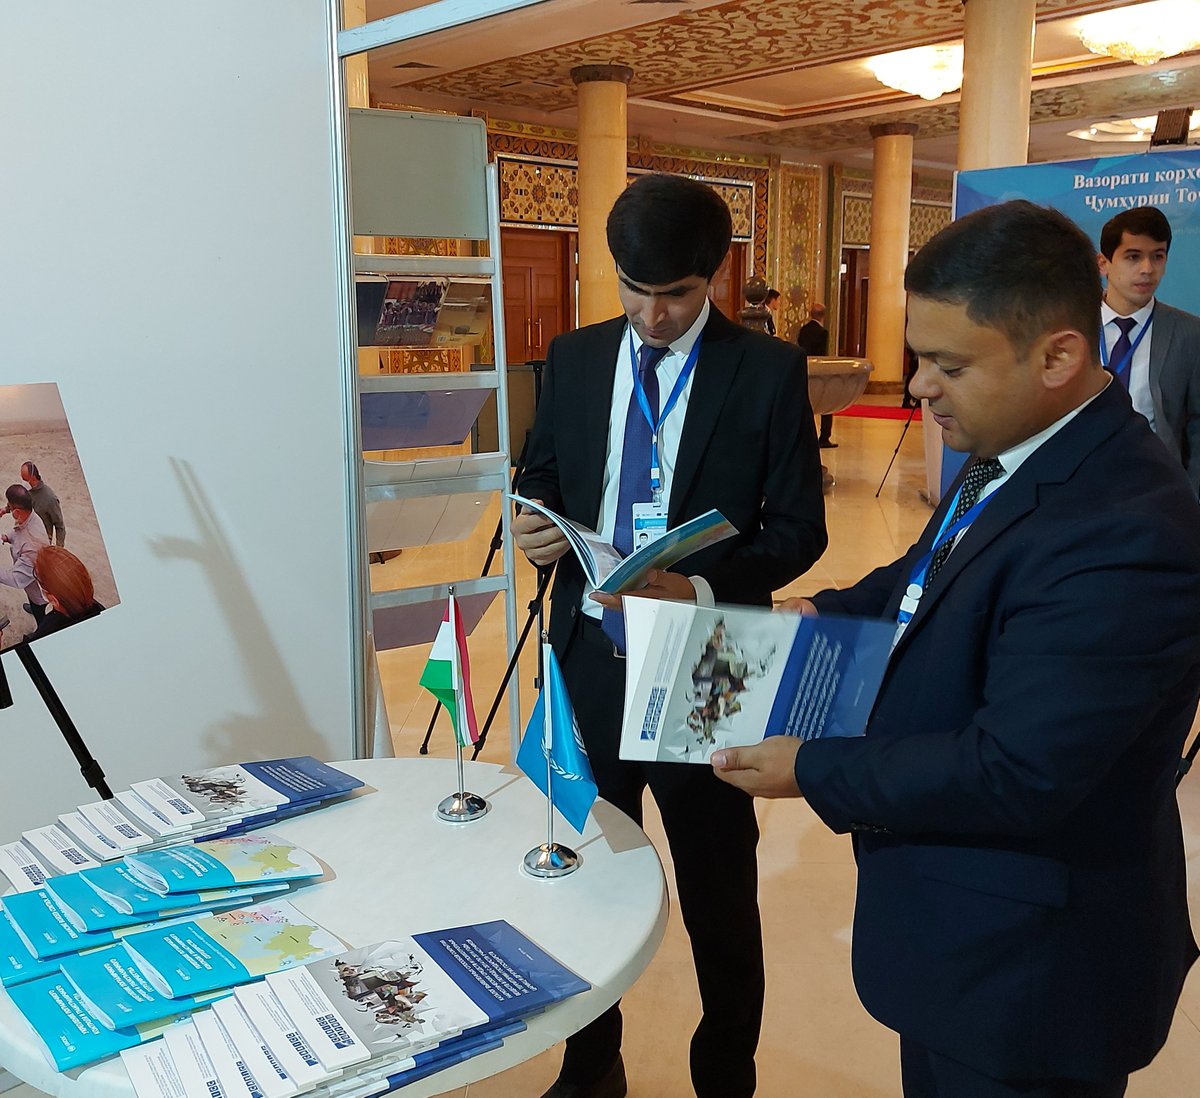 .@UNODC organized an exhibition at the high-level conference on #BorderSecurity coop. to counter #Terrorism in 🇹🇯 to showcase its work & achievements in border management & security & fighting terrorism in #CentralAsia. @MittalAshita @UNODC_TPB @UN_OCT @UNRCCA @UNinTajikistan